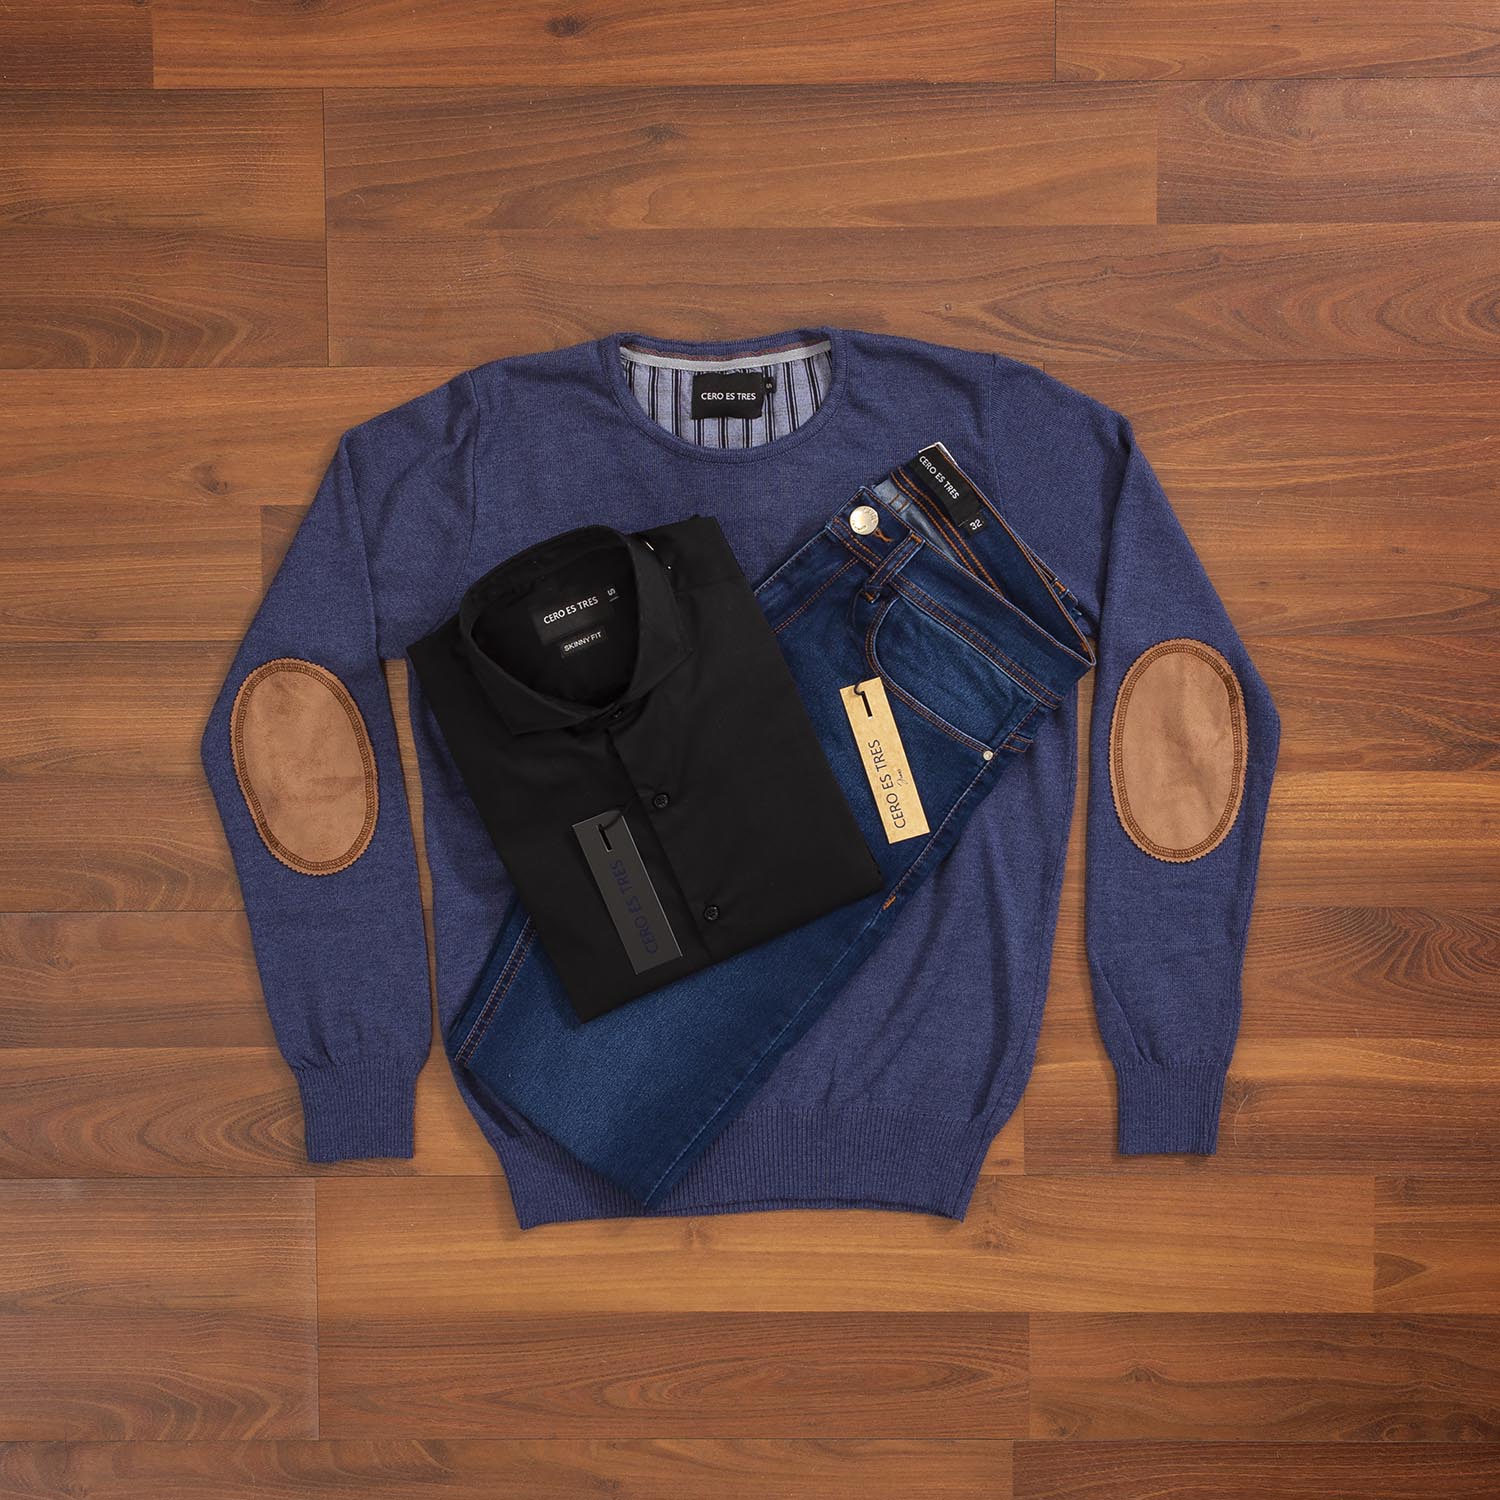 OUTFIT CERO 403